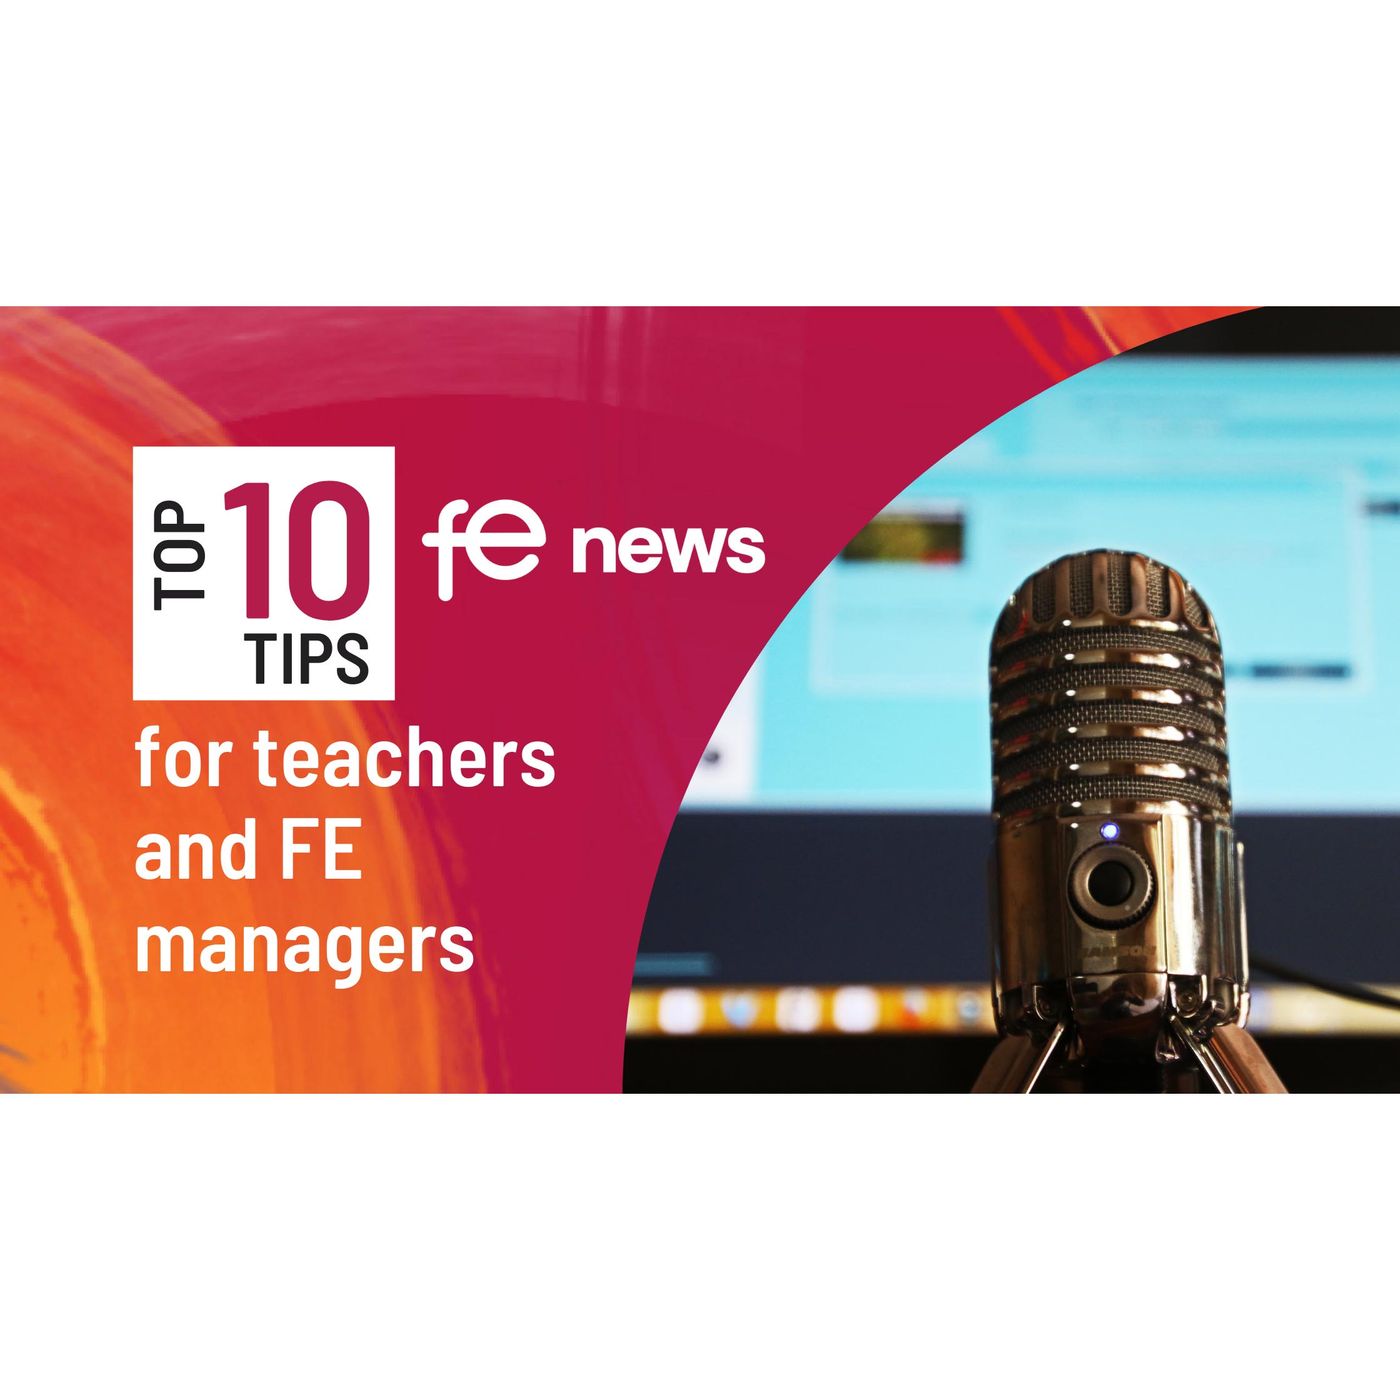 Changing Habits - Top Ten Tips for Teachers and FE Managers #6